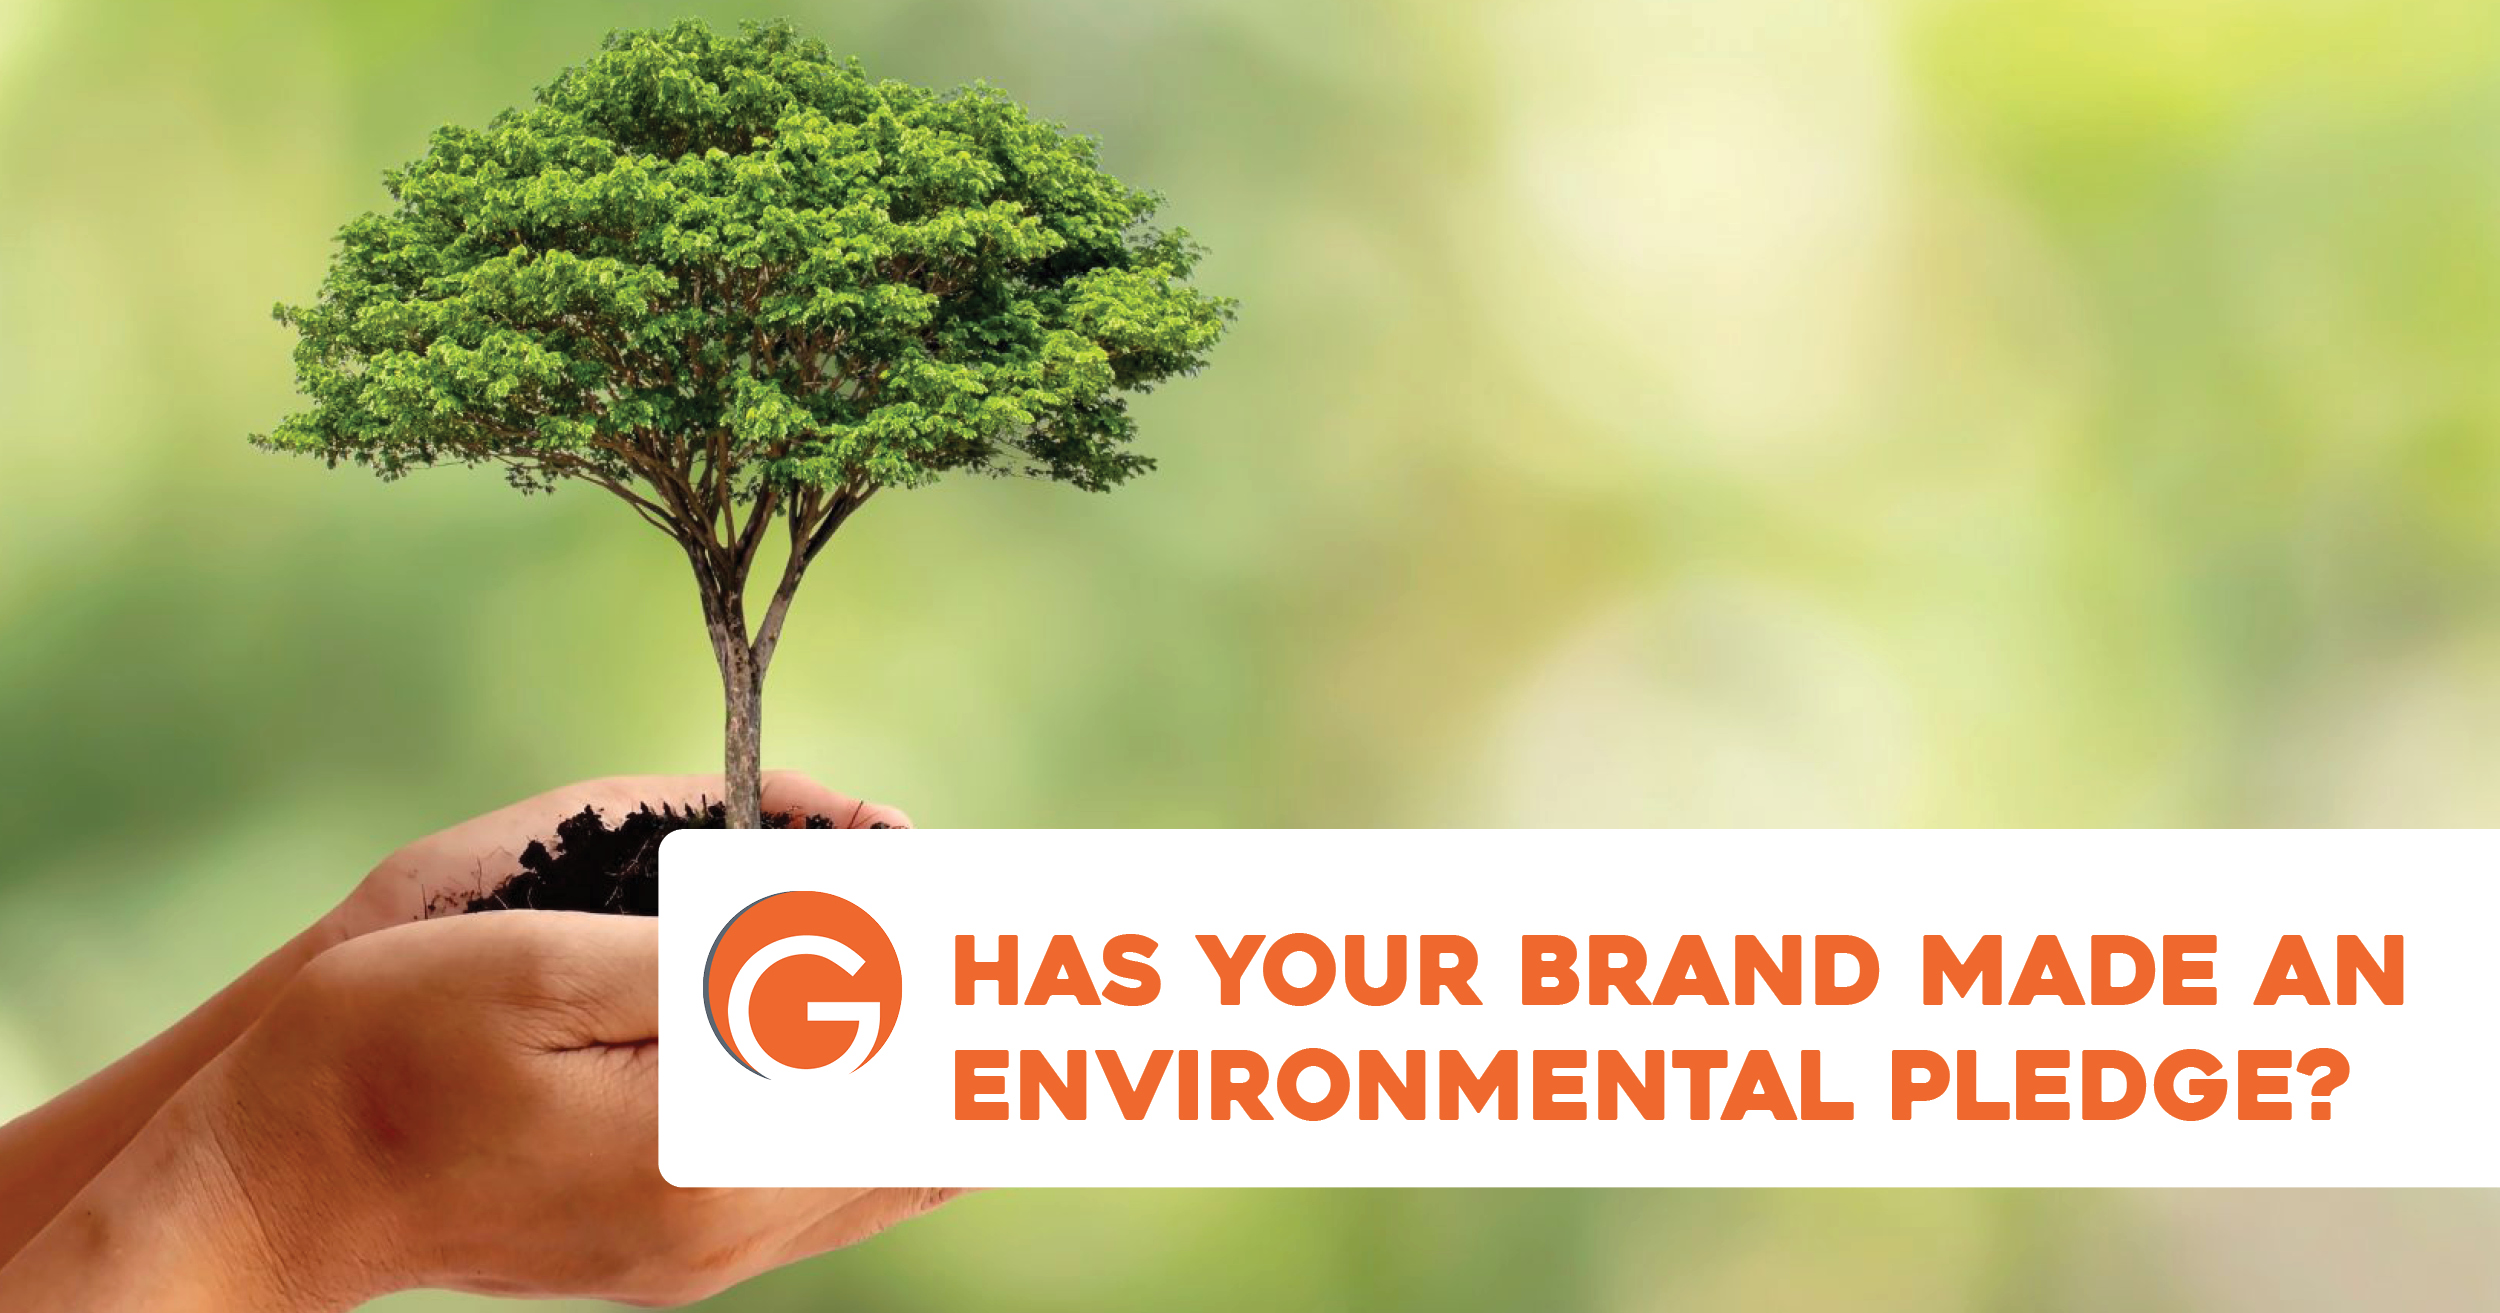 Has your brand made an environmental pledge?